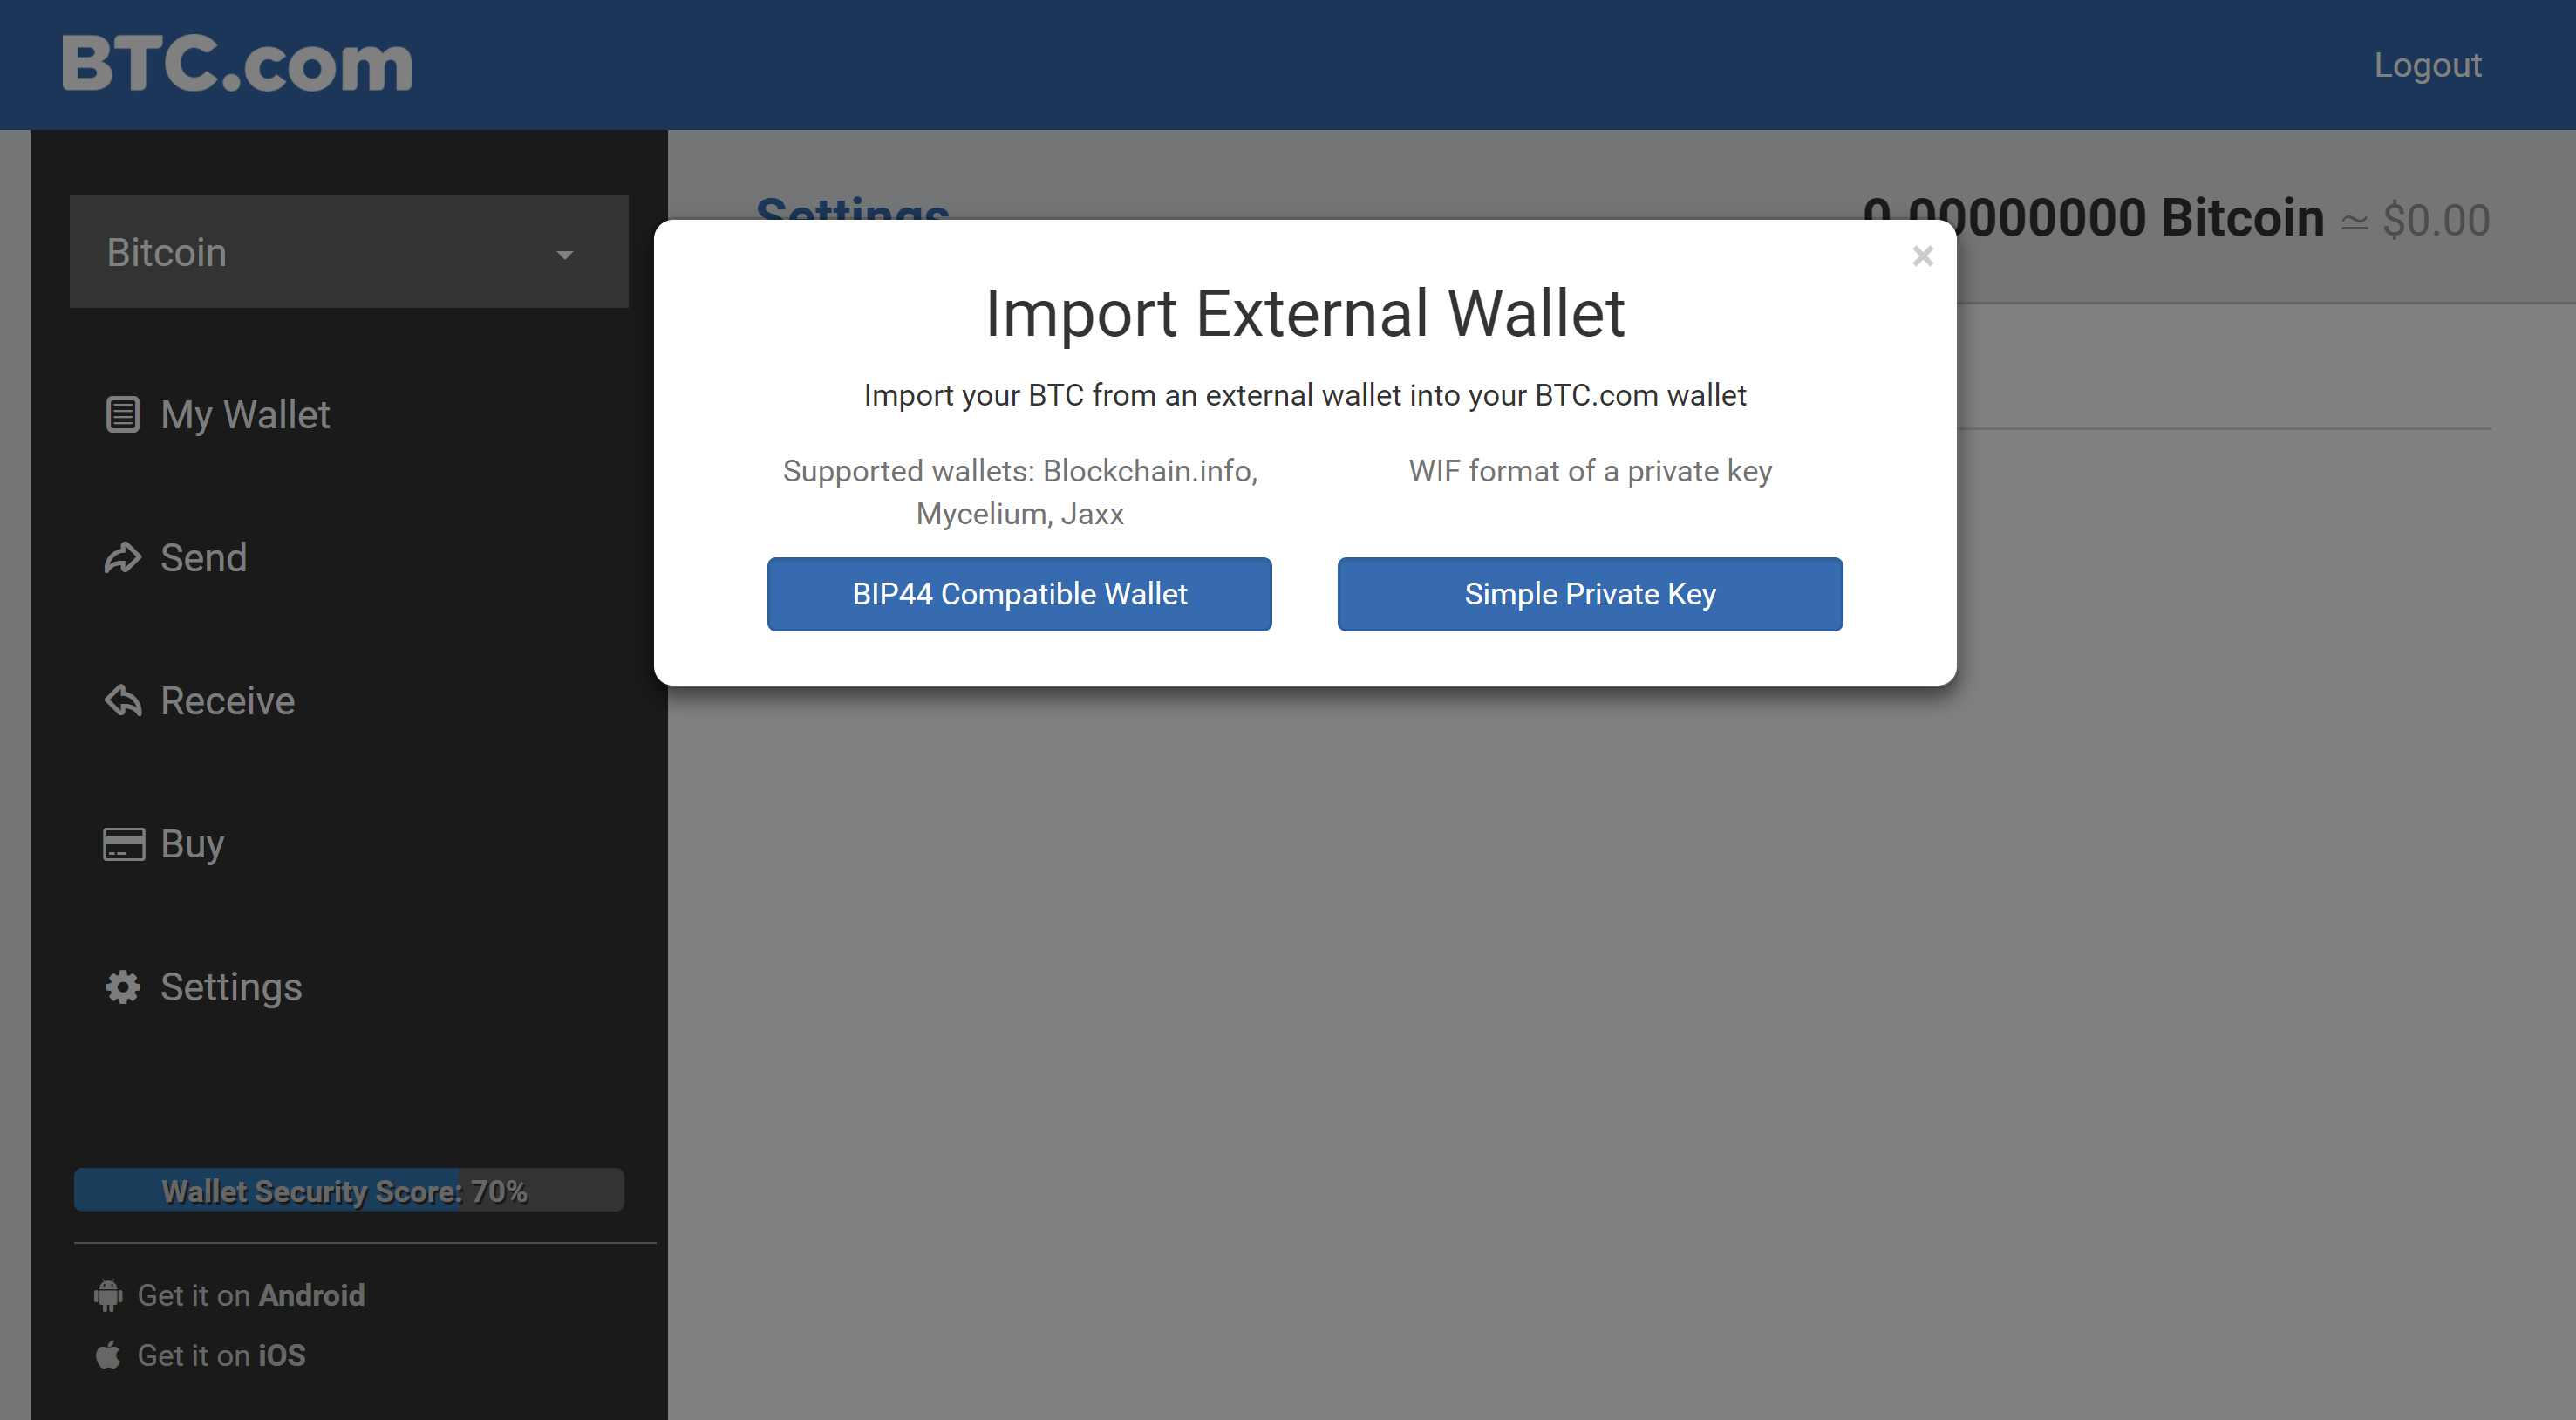 How to import private key into btc.com wallet